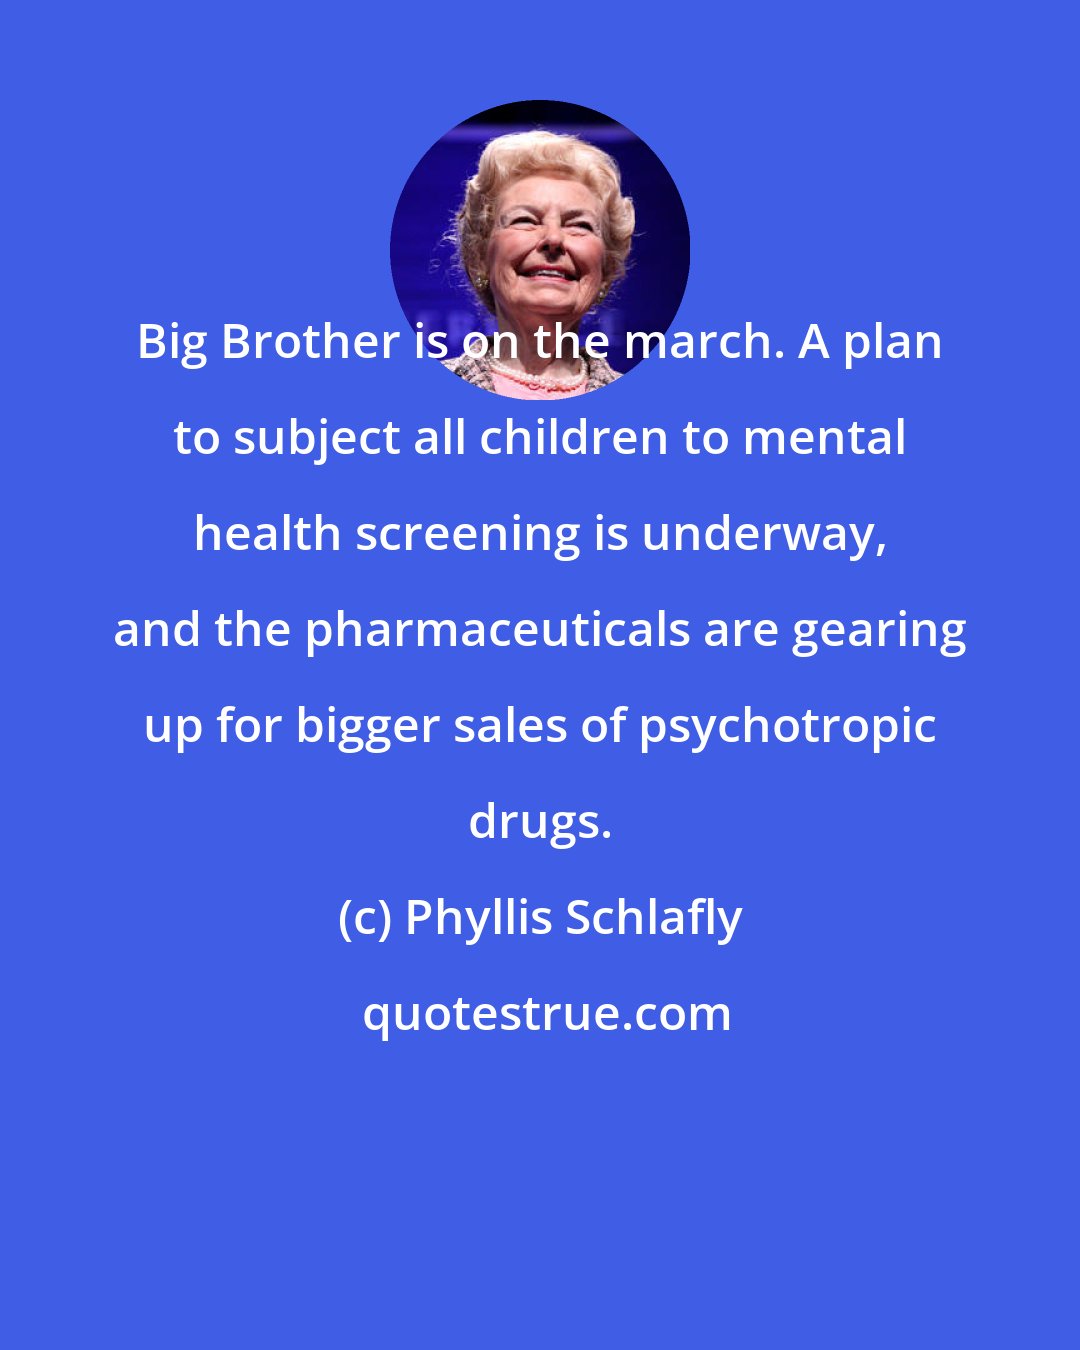 Phyllis Schlafly: Big Brother is on the march. A plan to subject all children to mental health screening is underway, and the pharmaceuticals are gearing up for bigger sales of psychotropic drugs.